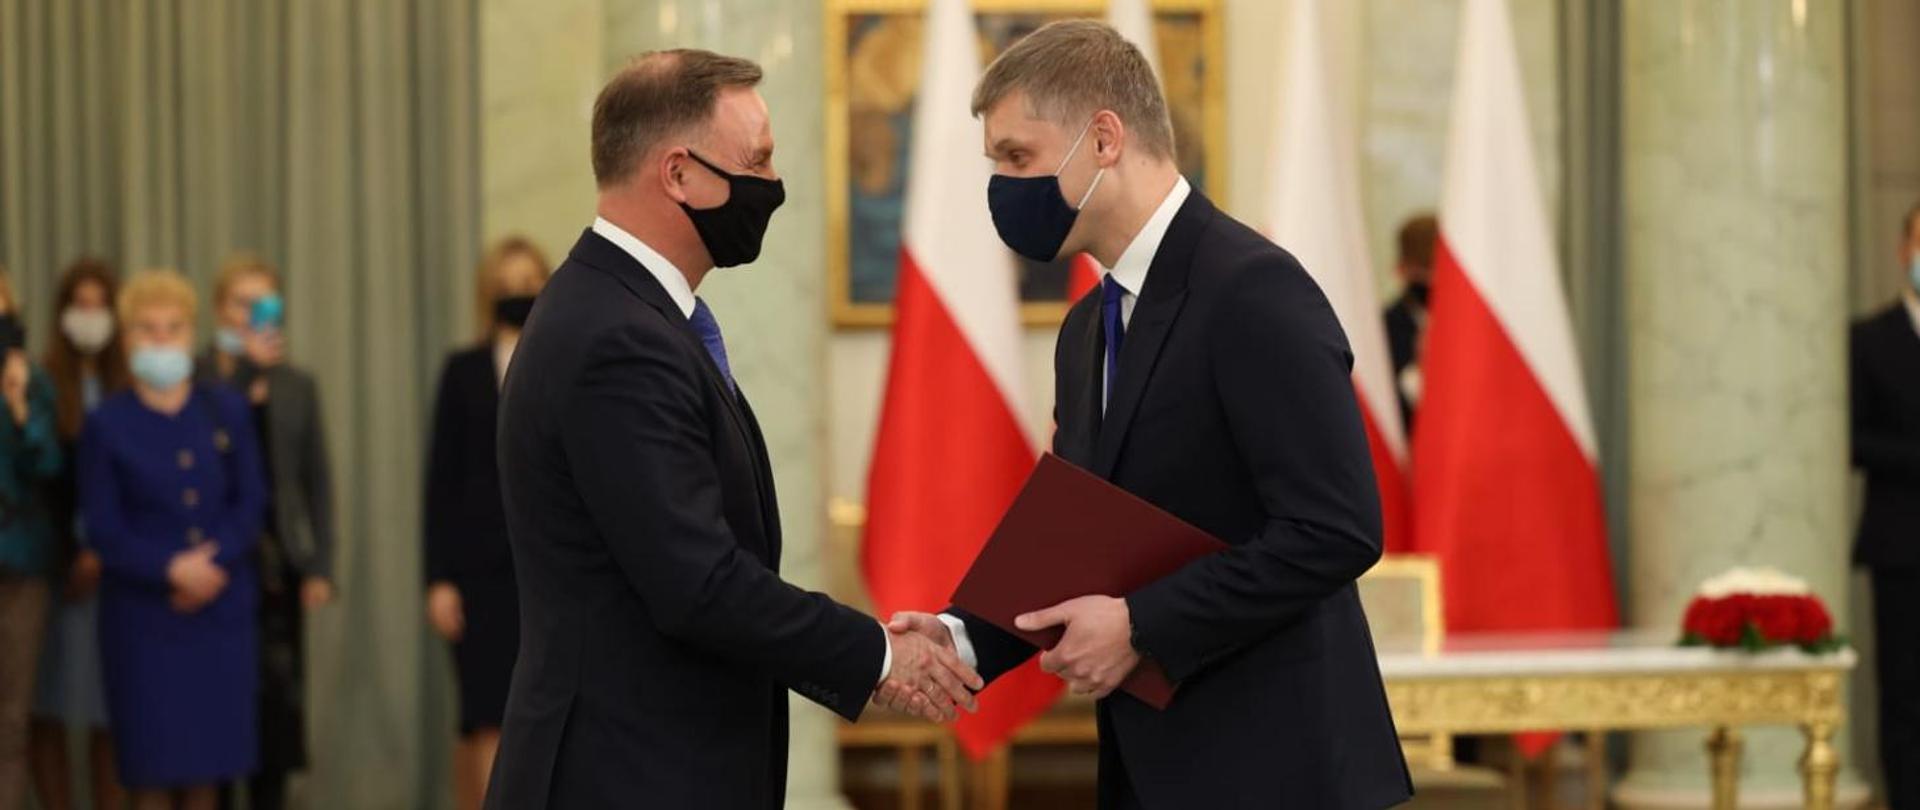 President of the Republic of Poland Andrzej Duda congratulates Piotr Nowak on his nomination as Minister of Development and Technology